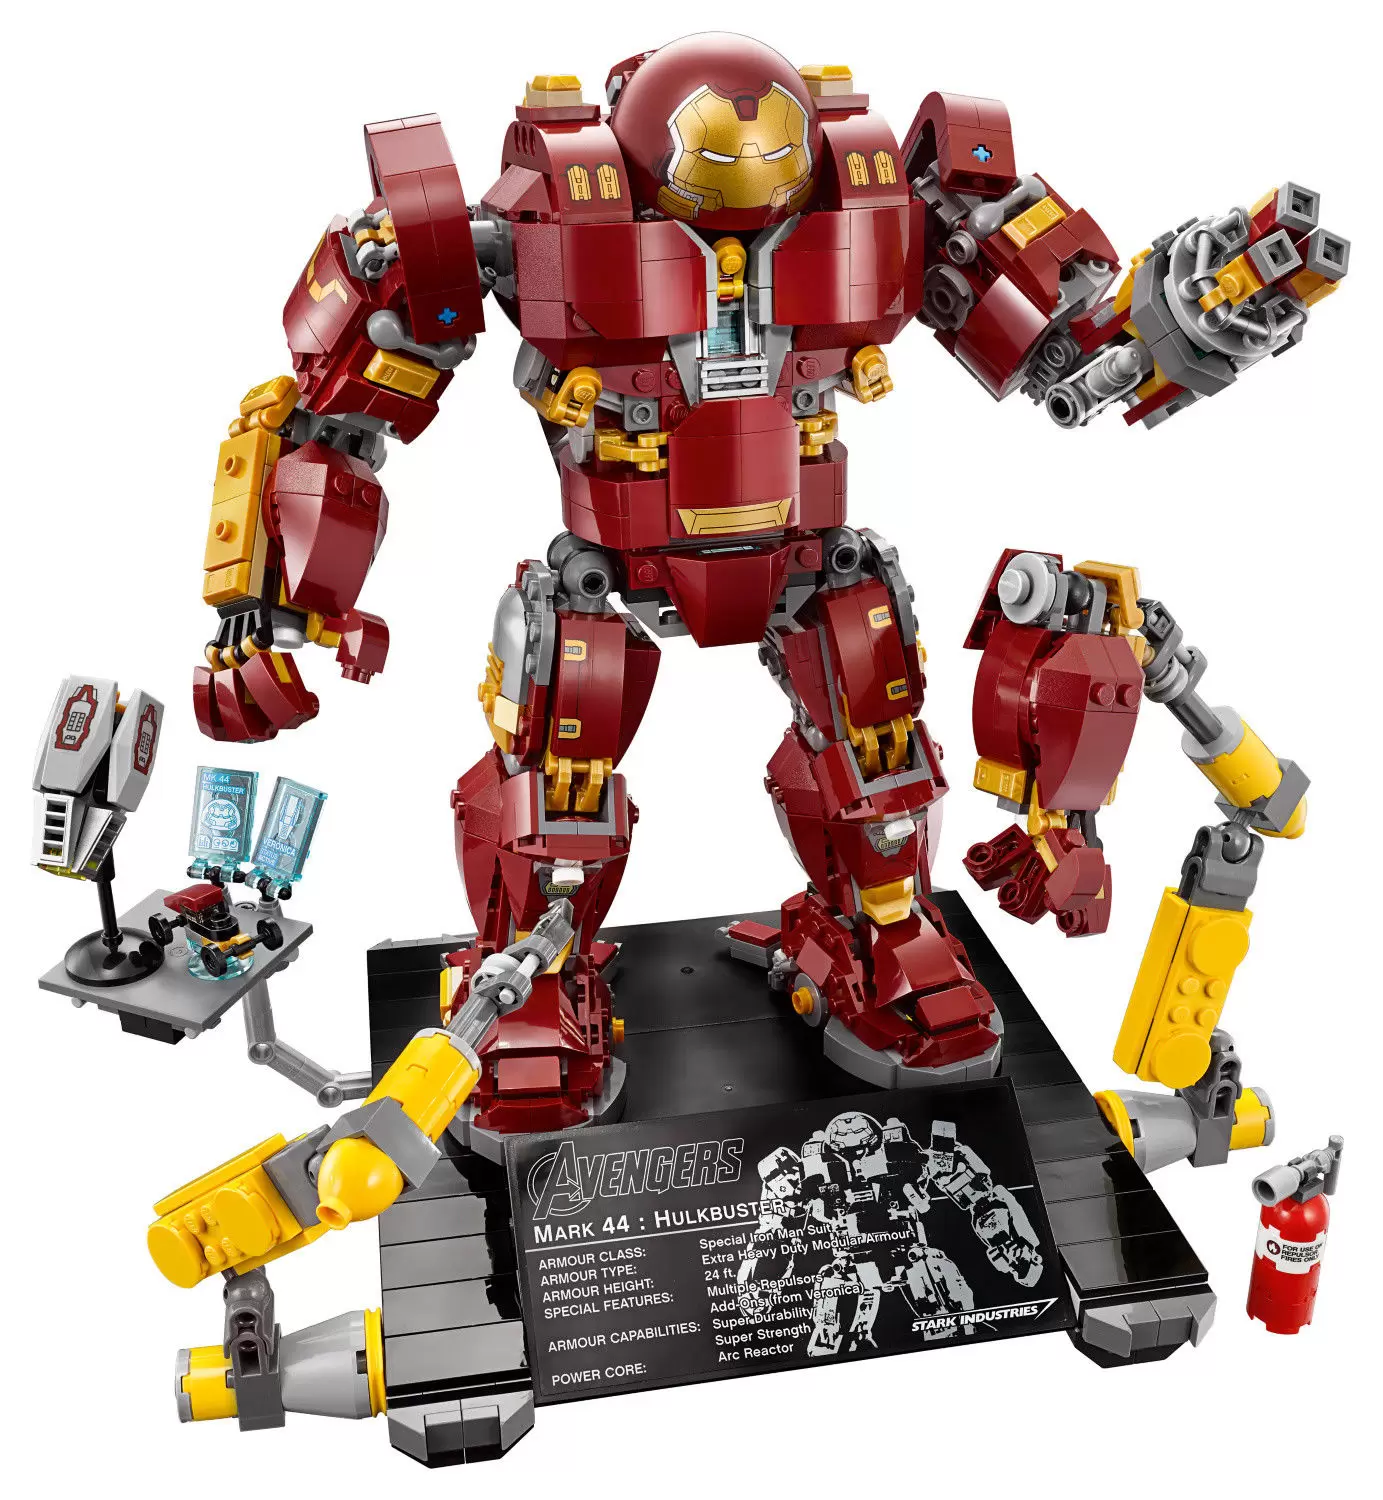 LEGO MARVEL Super Heroes - The Hulkbuster : Ultron Edition